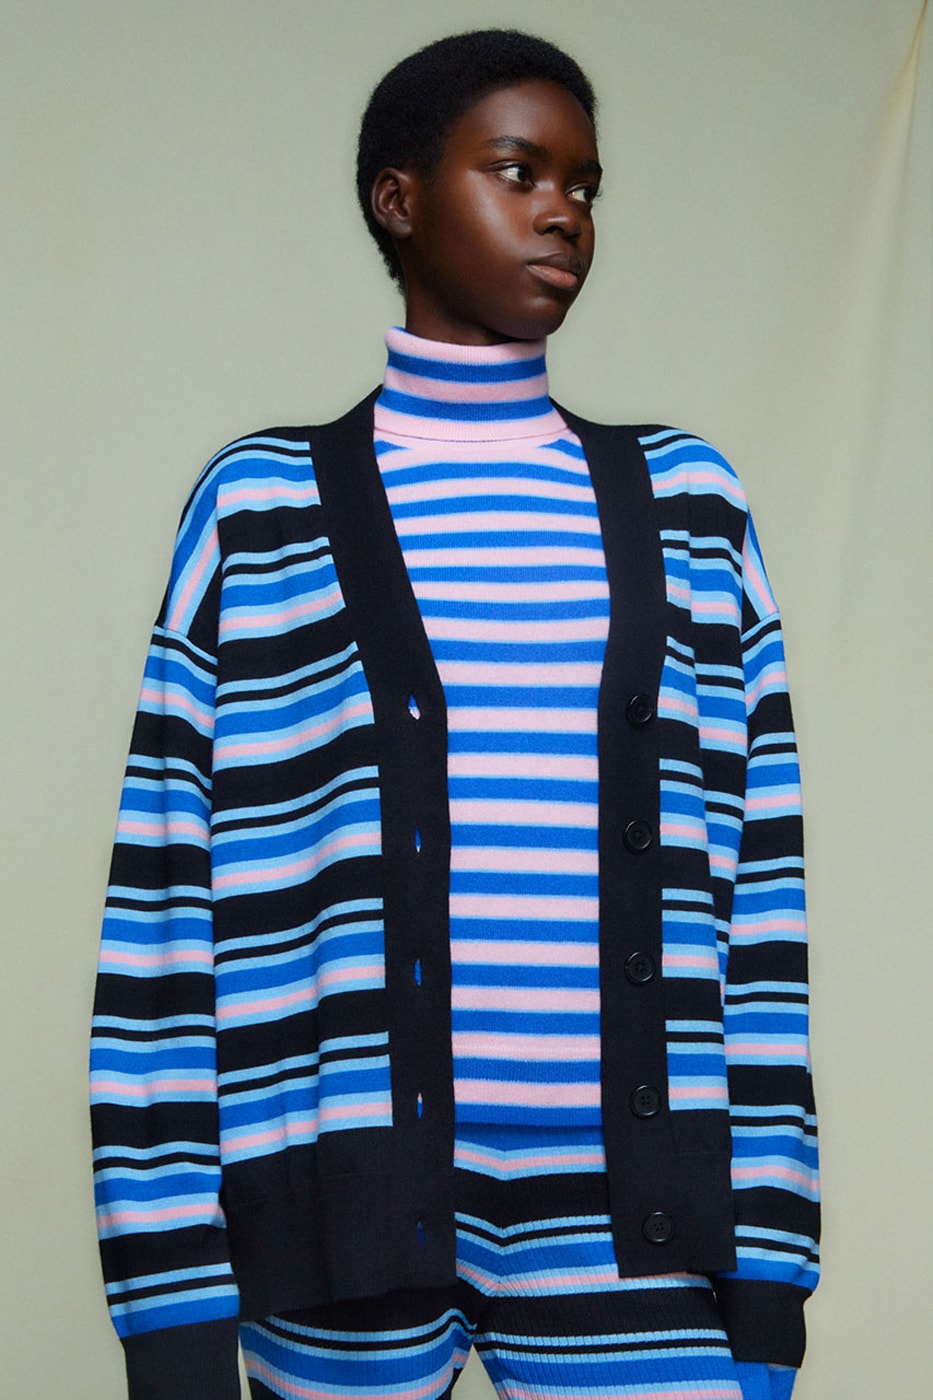 The Uniqlo x Marni Collection Is Here and We're Obsessed